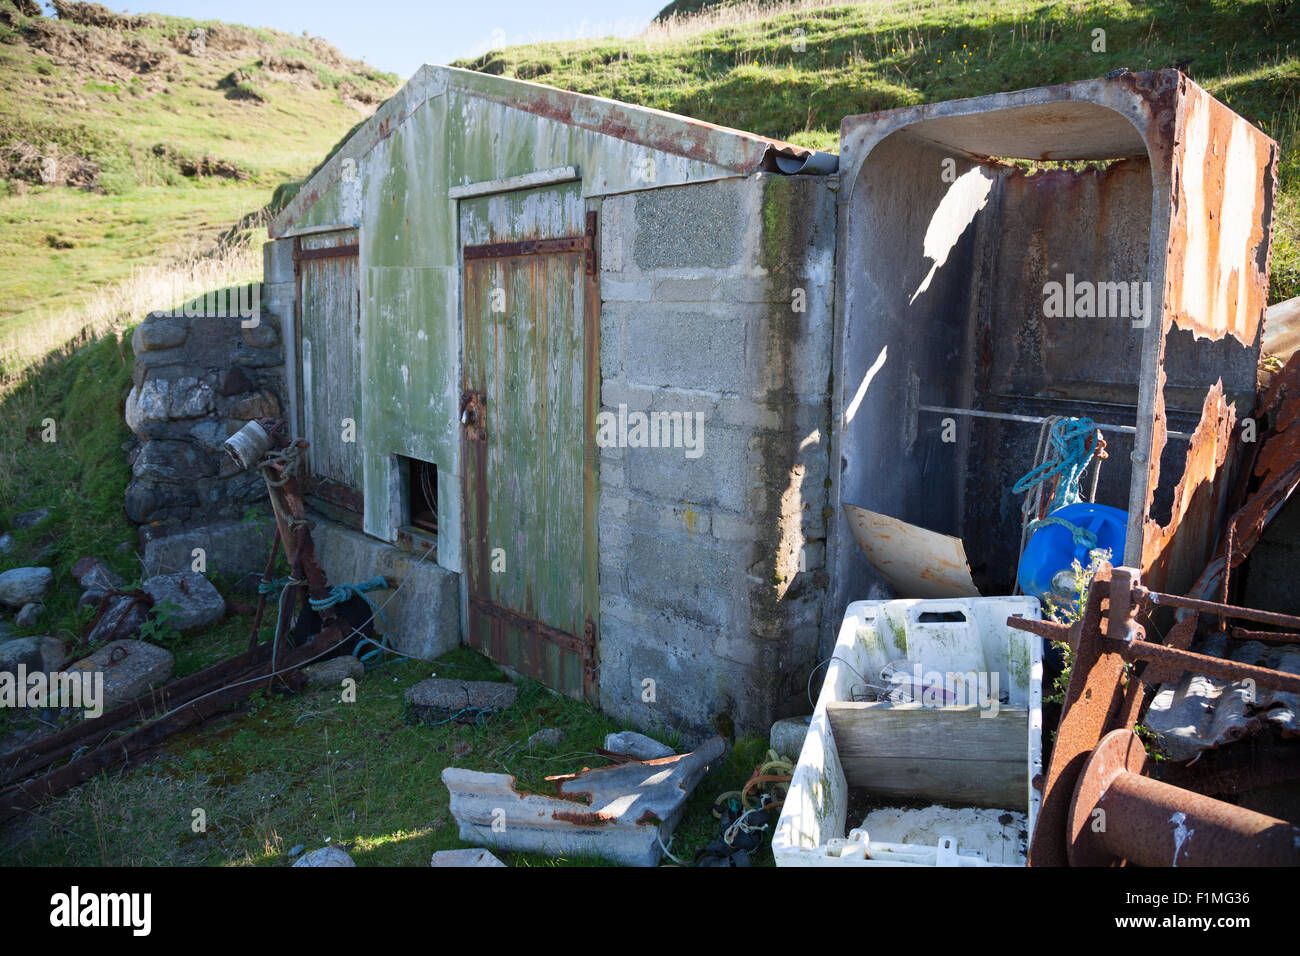 Abandoned fishing hut at Porth Ysgaden, Tudweiliog, Llyn Peninsula, North Wales with rope, crates, boxes, flaking paint and rust Stock Photo